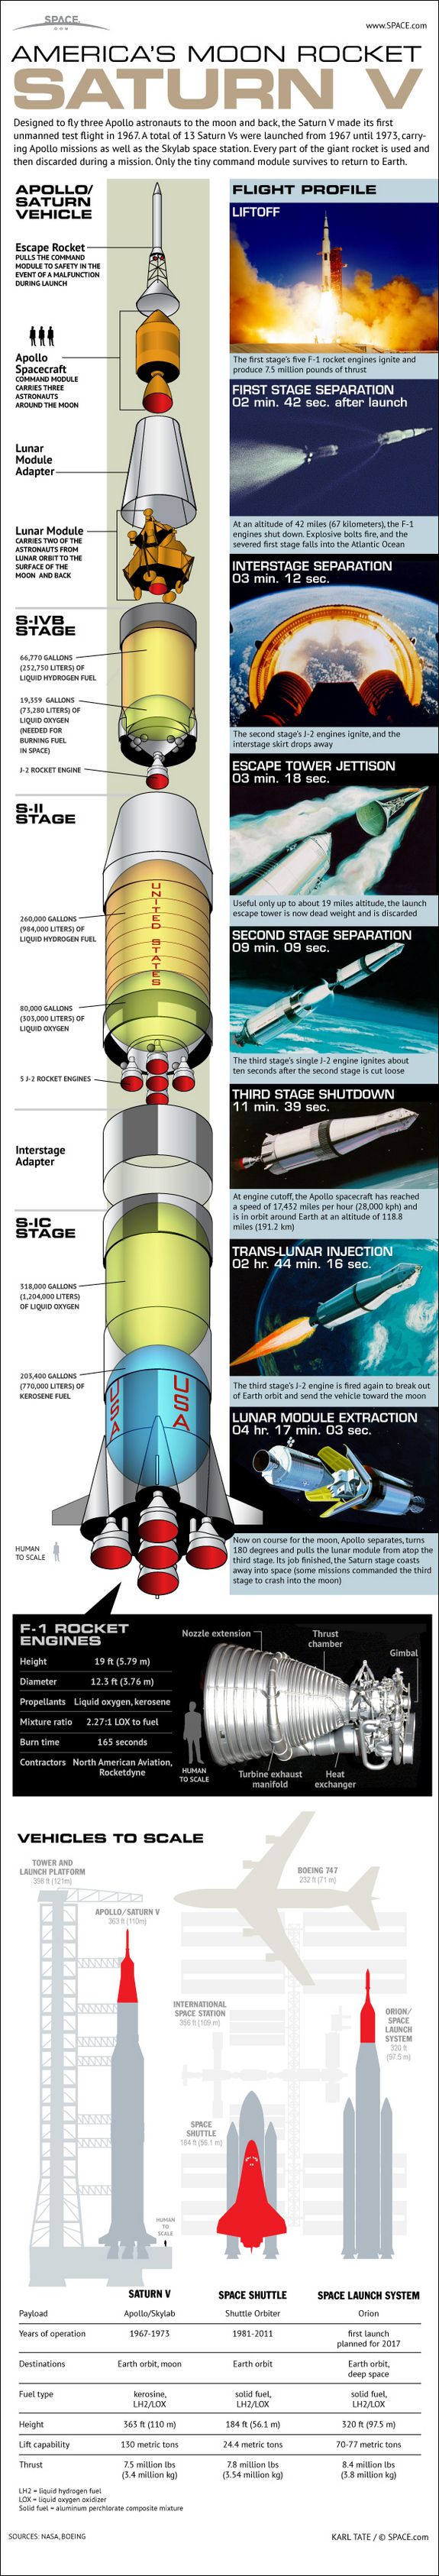 Learn about the huge Saturn V rocket booster that launched men to the moon, in this SPACE.com infographic.